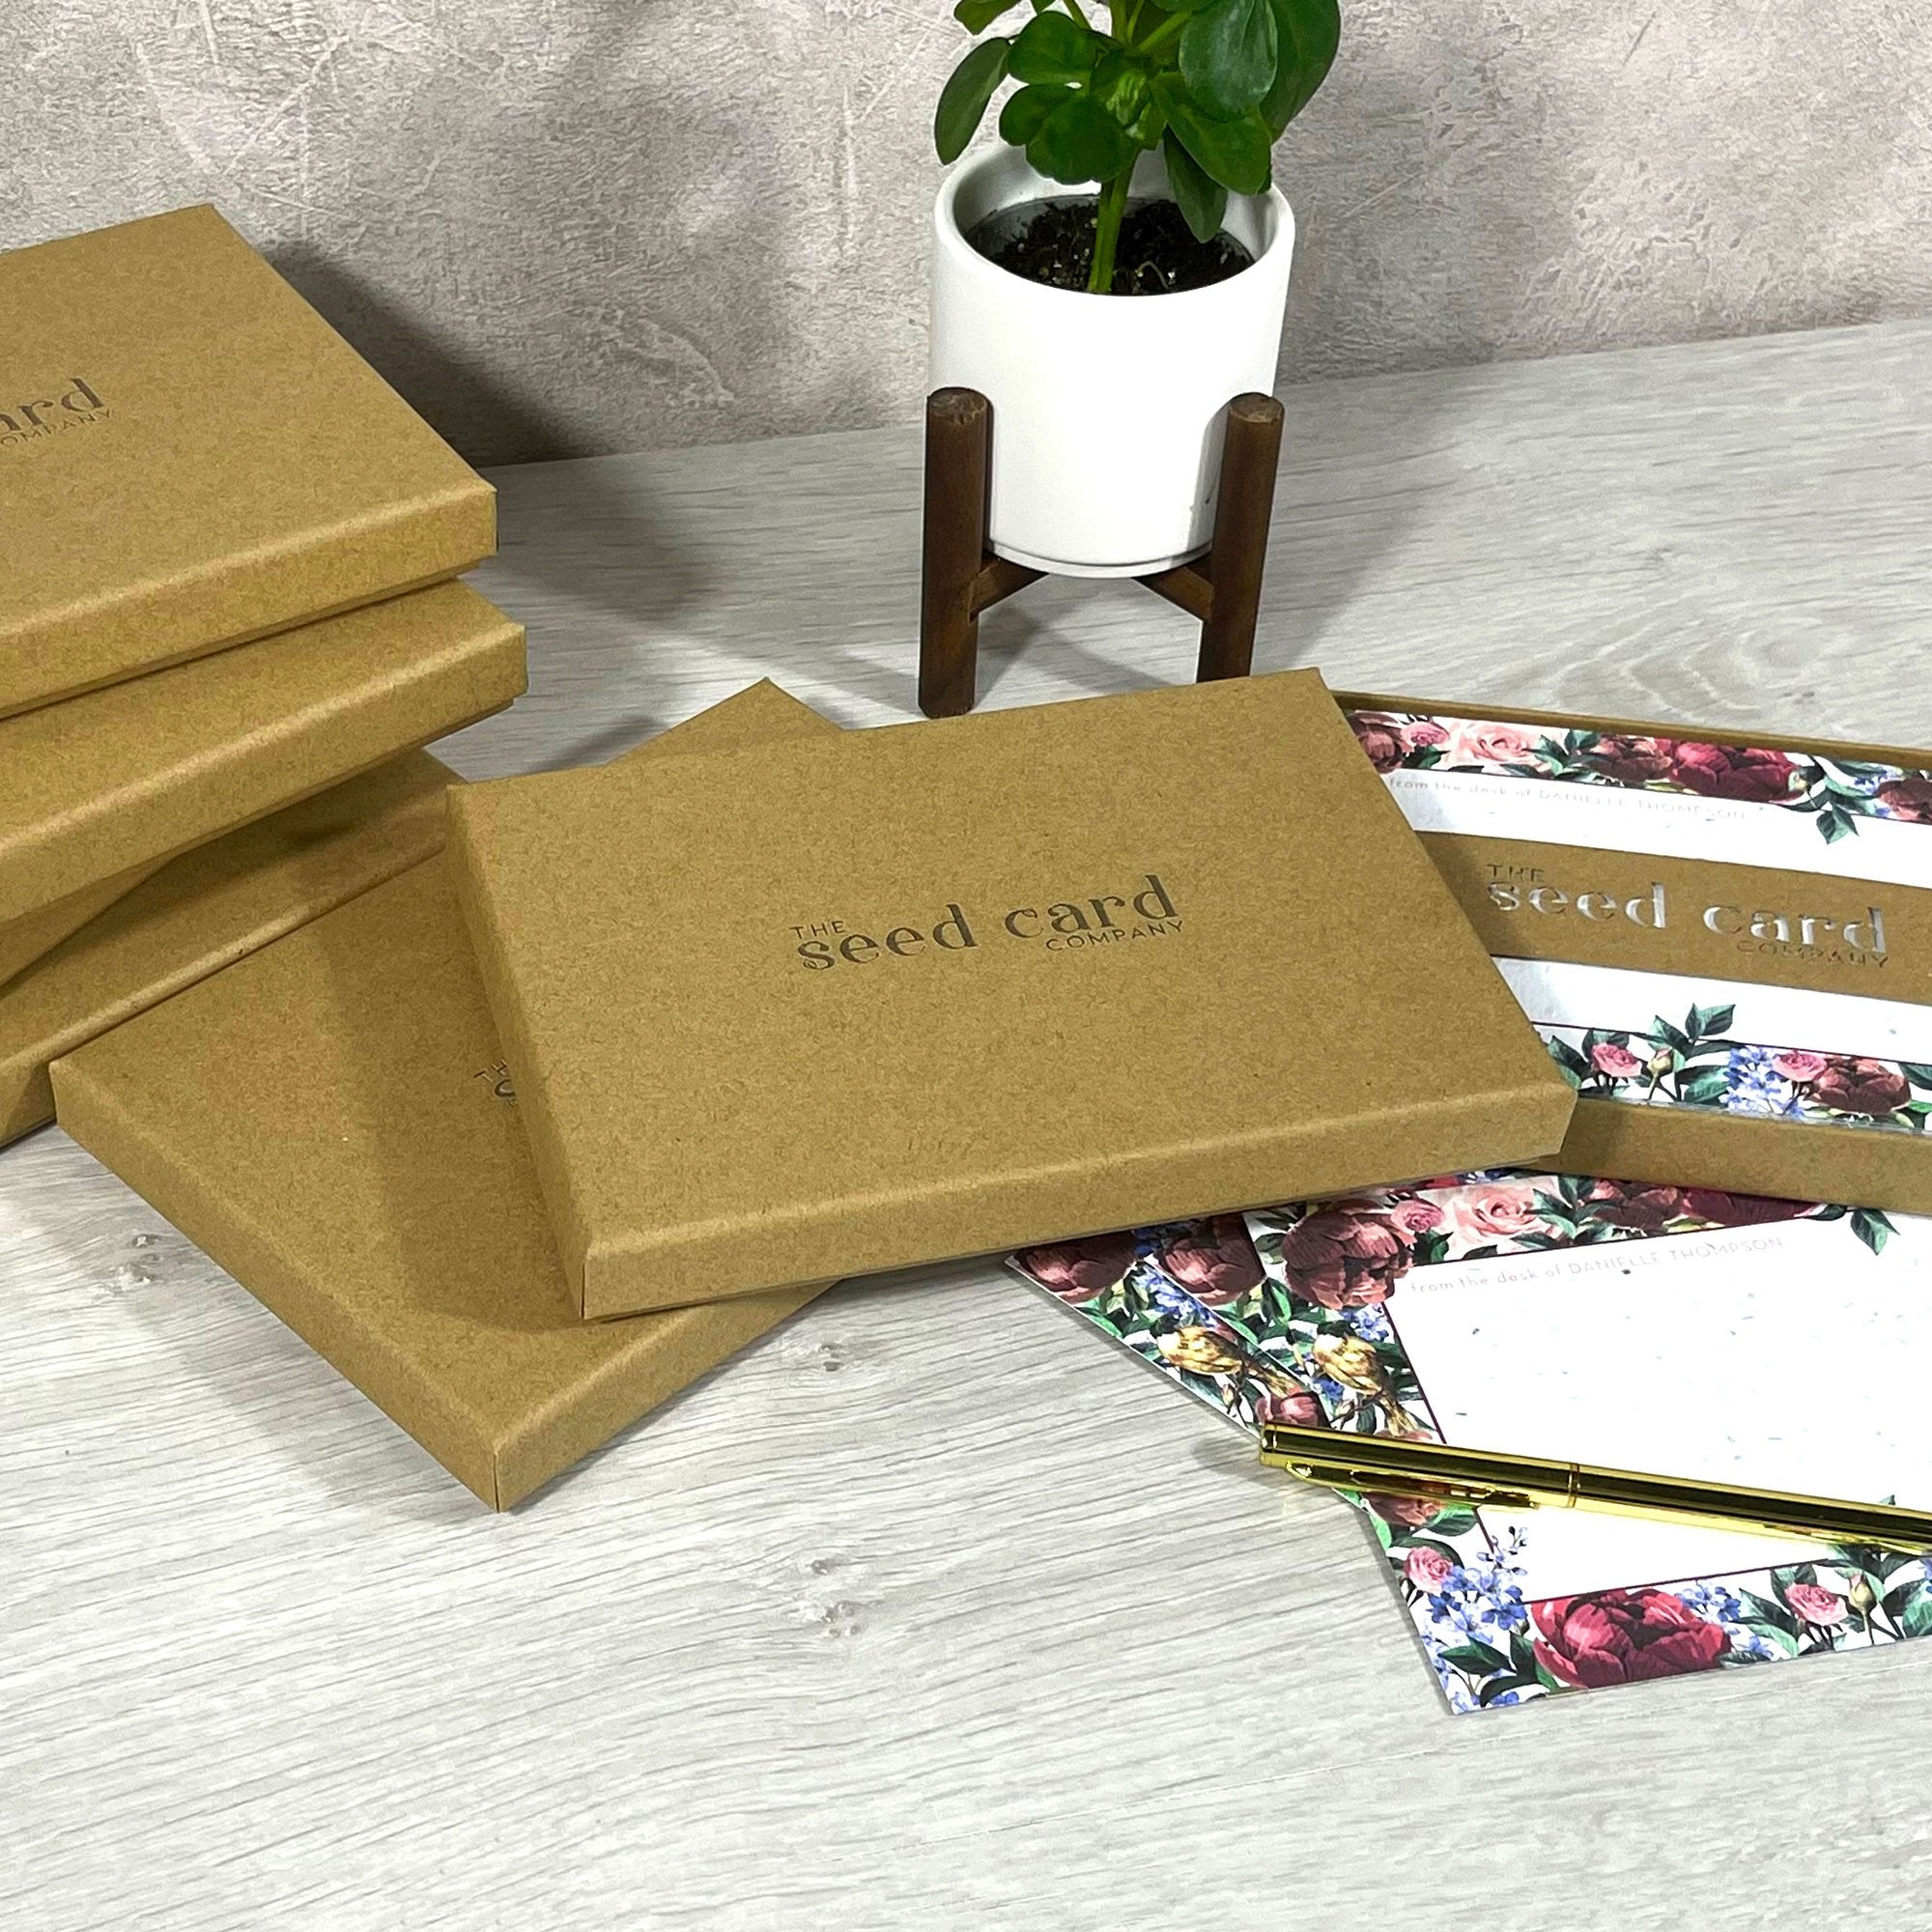 Shop online Moody Meadow - 100% biodegradable seed-embedded cards Shop -The Seed Card Company